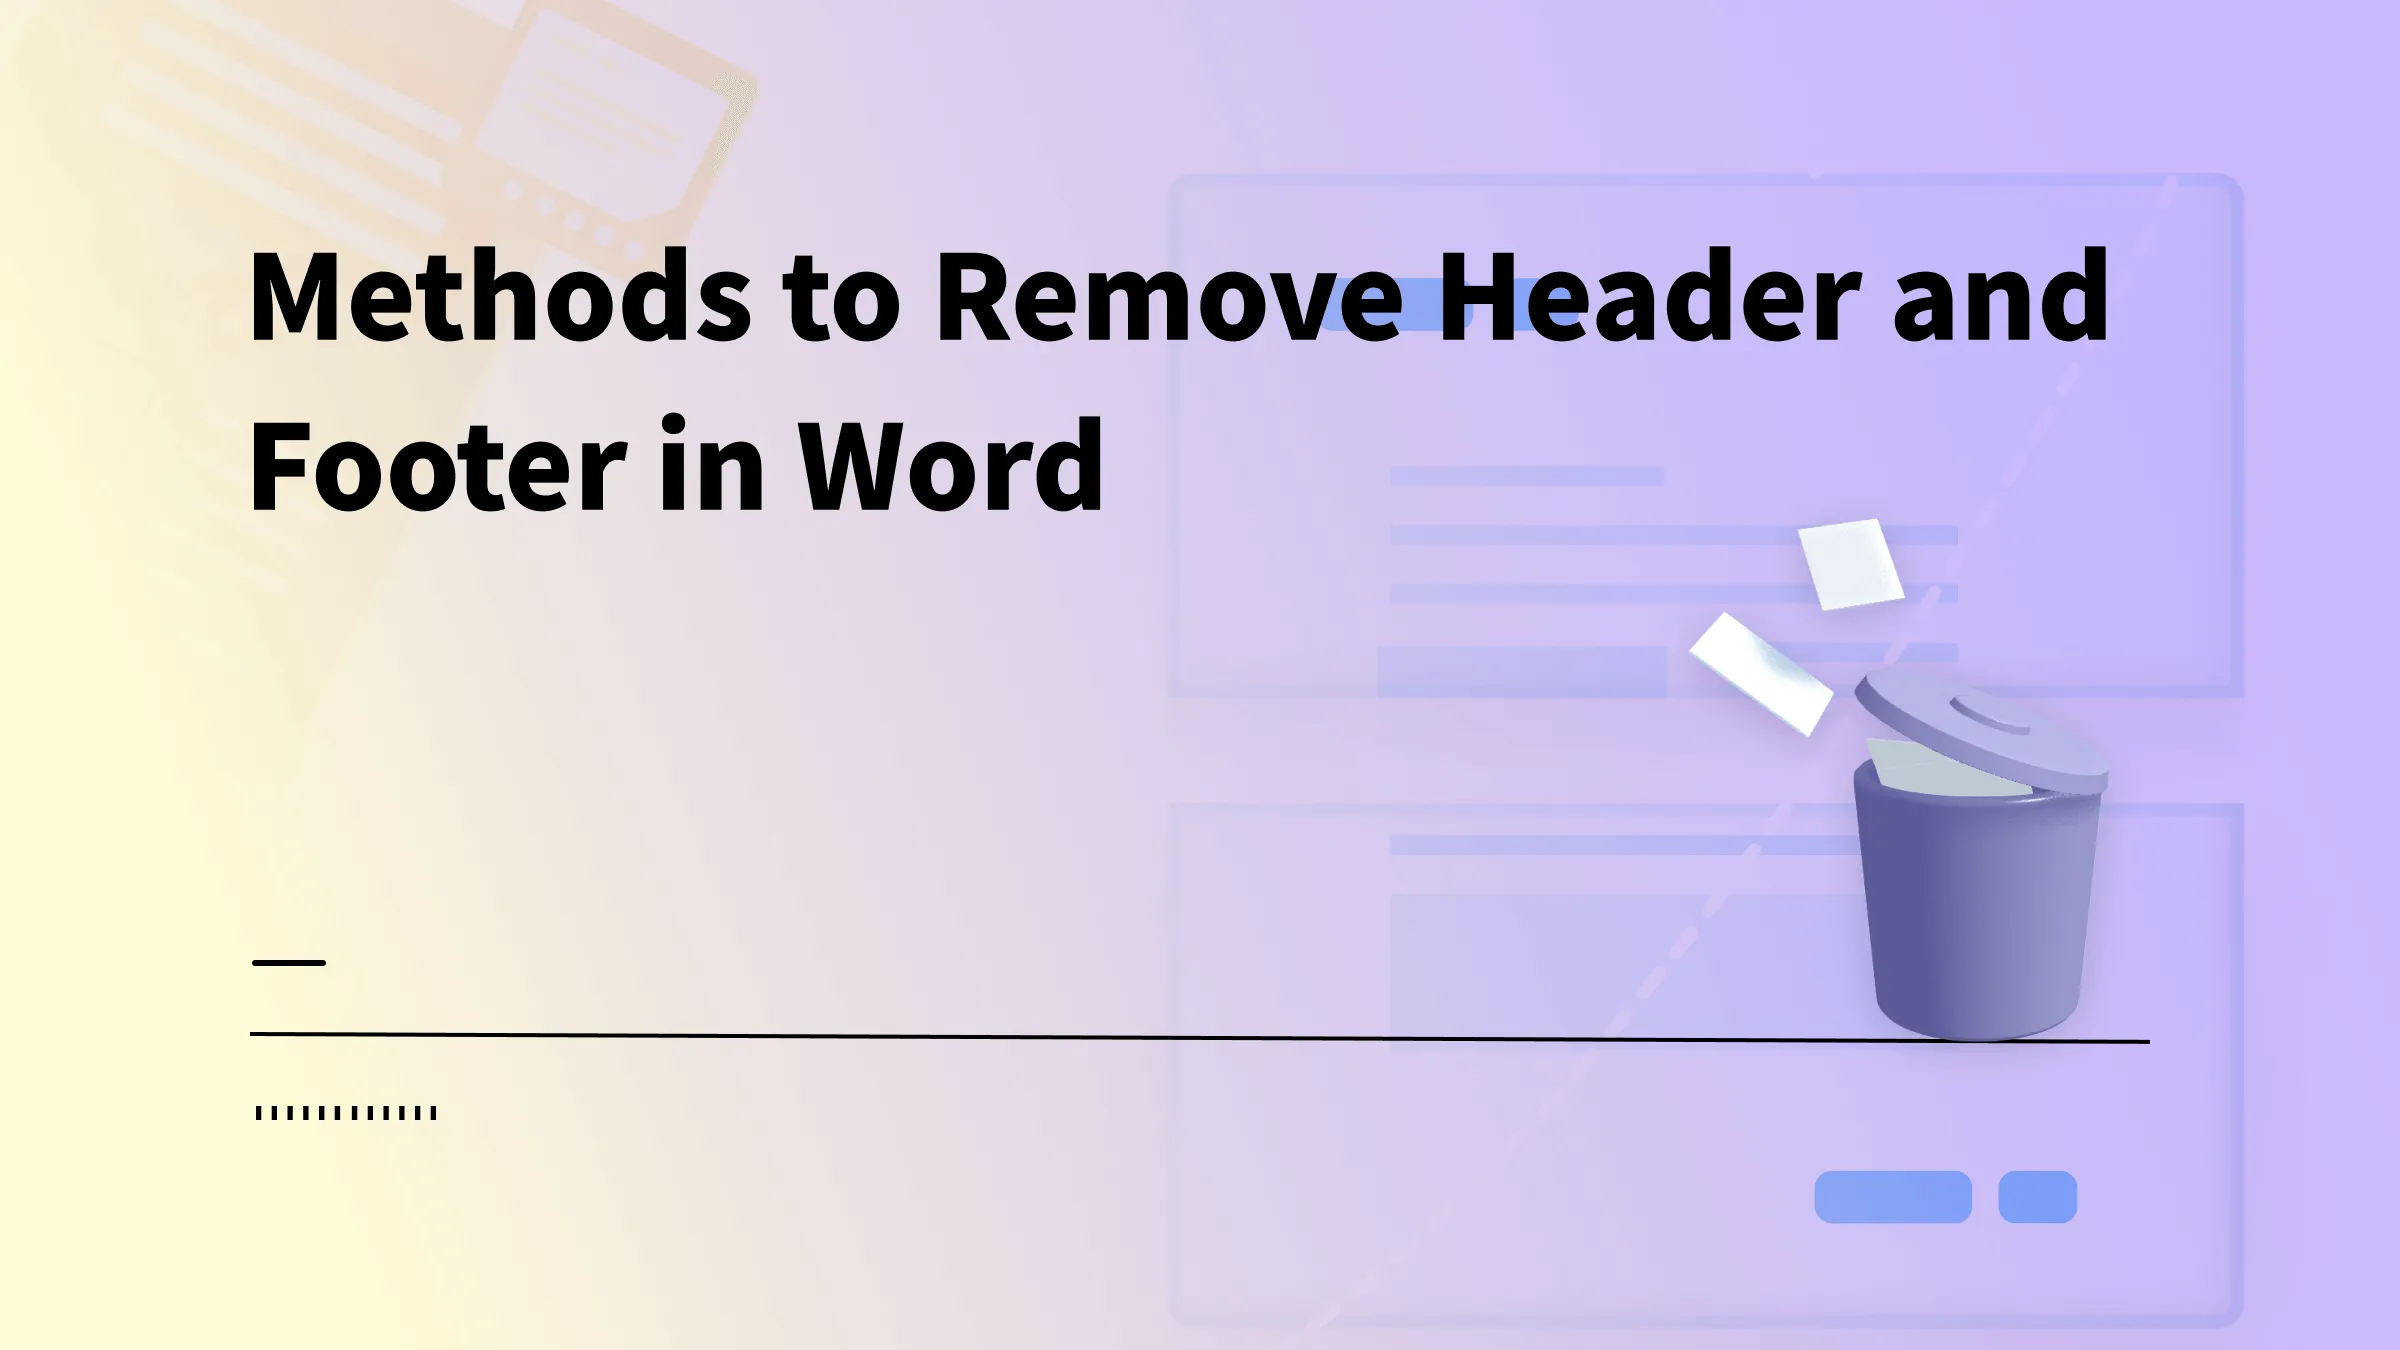 Top 3 Methods to Remove Header and Footer in Word